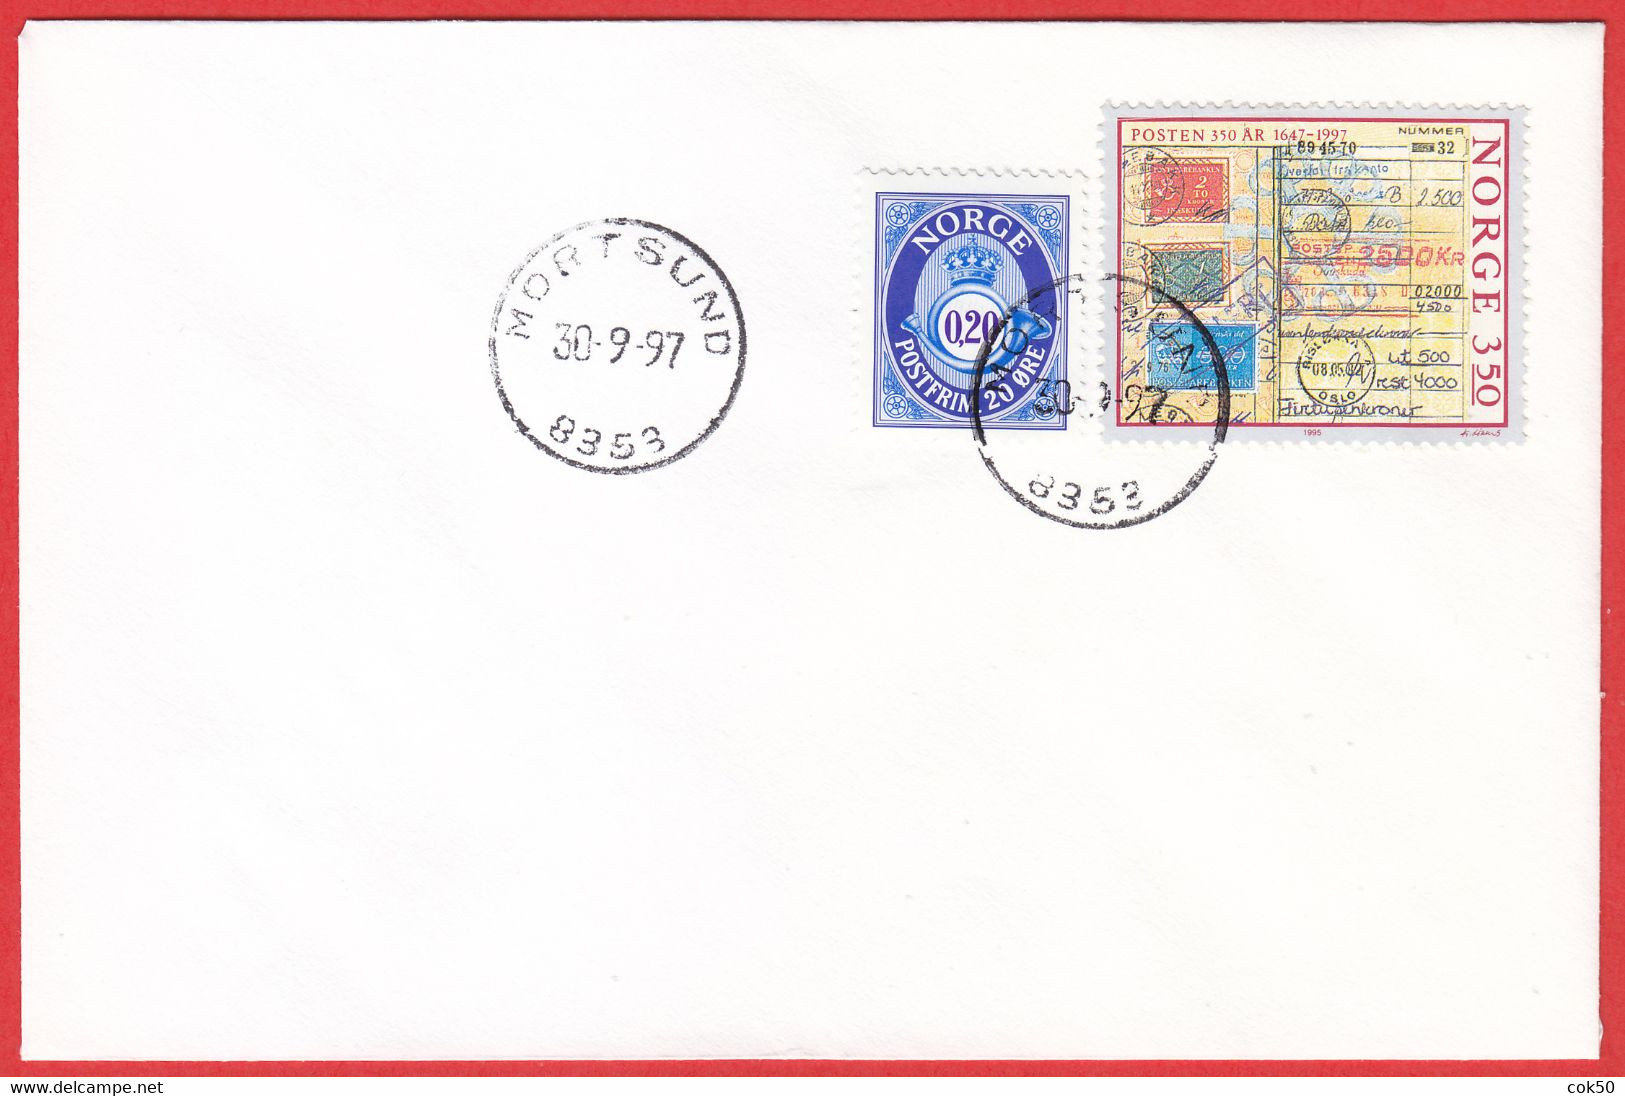 NORWAY -  8353 MORTSUND - (Nordland County) - Last Day/postoffice Closed On 1997.09.30 - Local Post Stamps